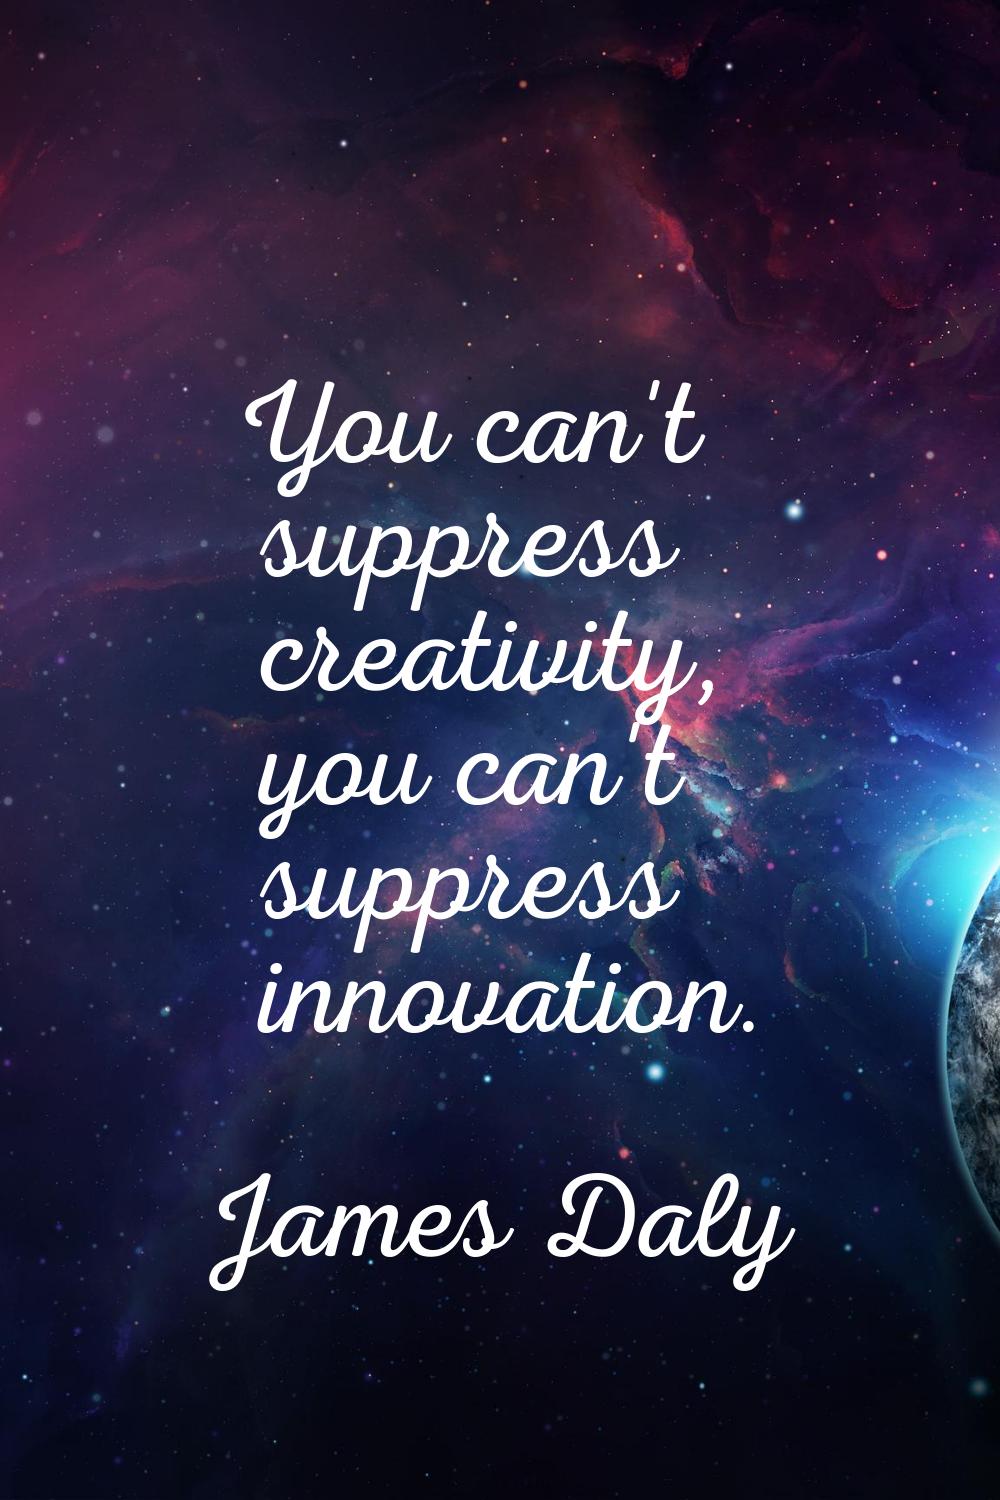 You can't suppress creativity, you can't suppress innovation.